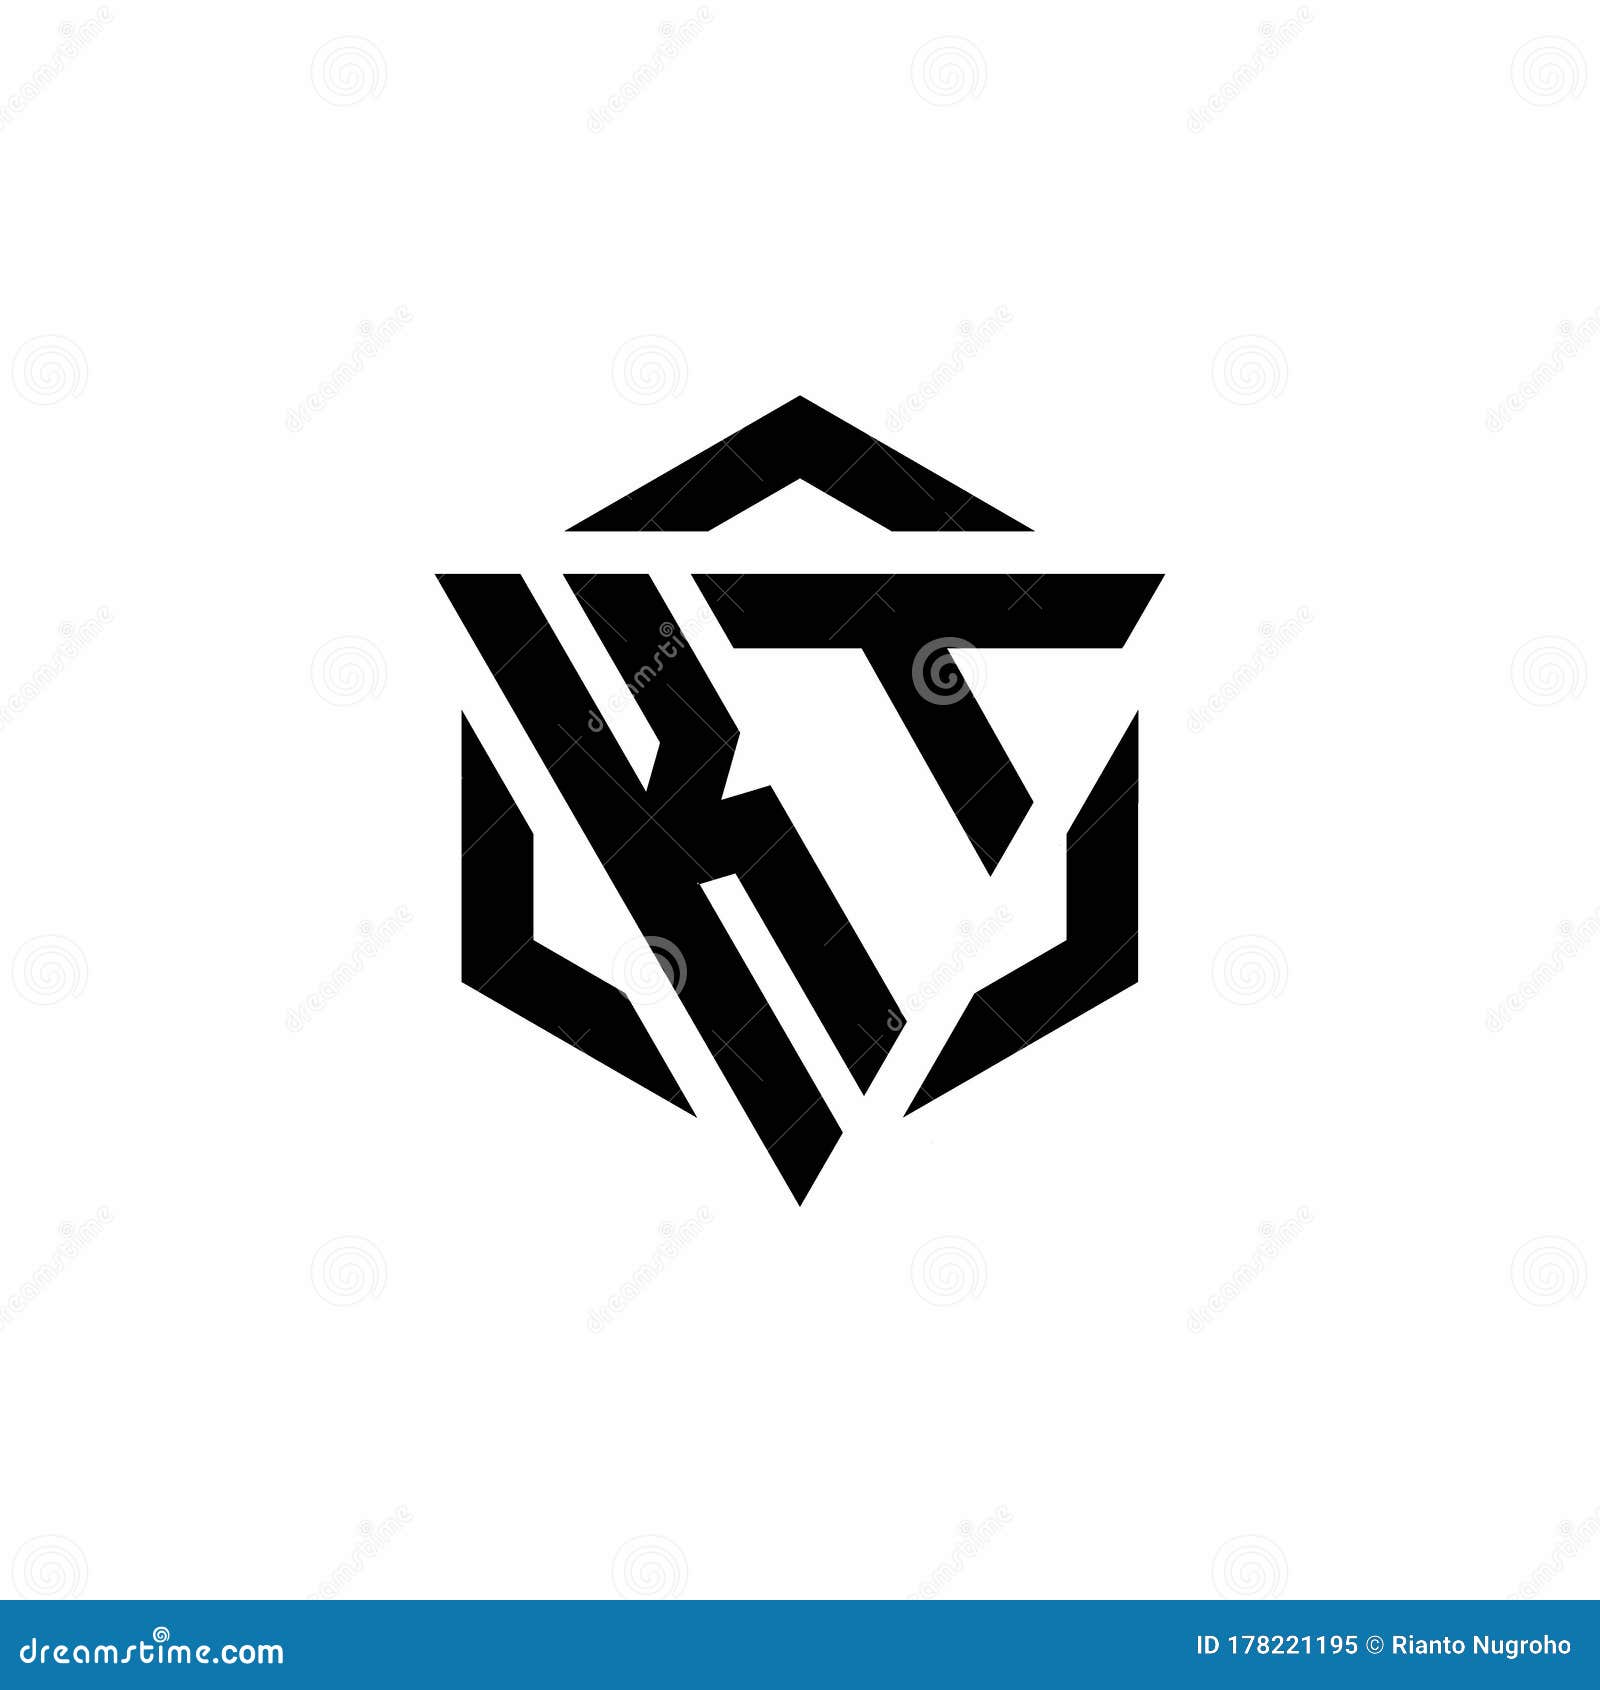 KT Logo Monogram with Triangle and Hexagon Modern Design Template ...